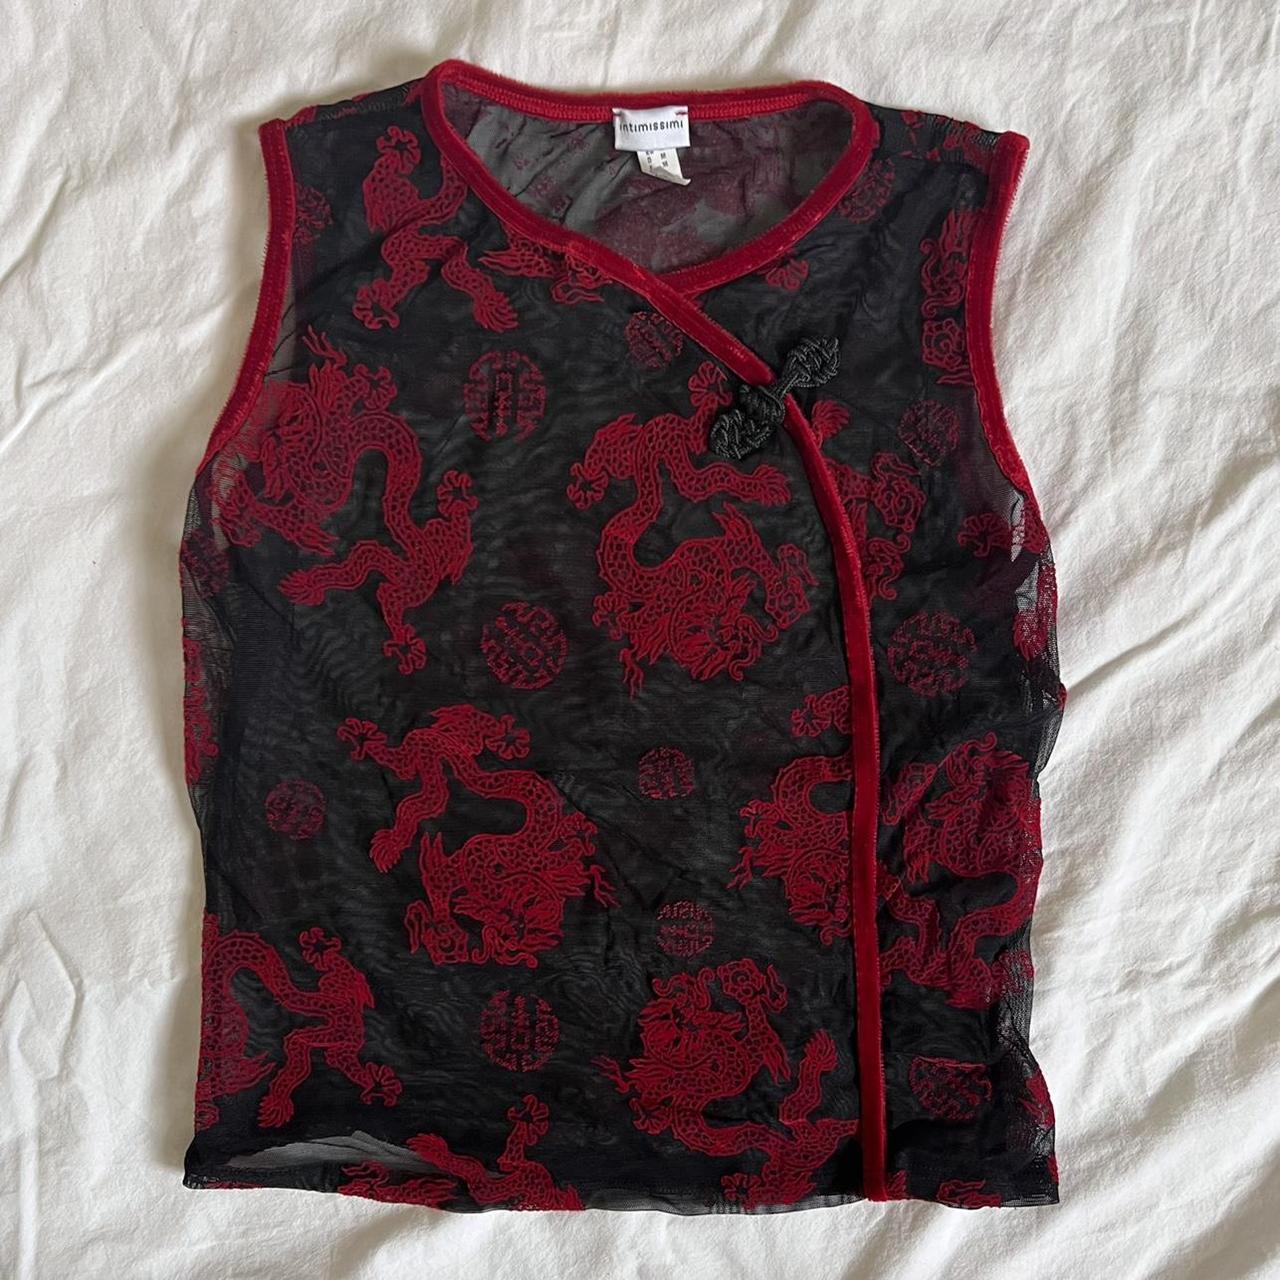 Intimissimi Women's Black and Red Vest